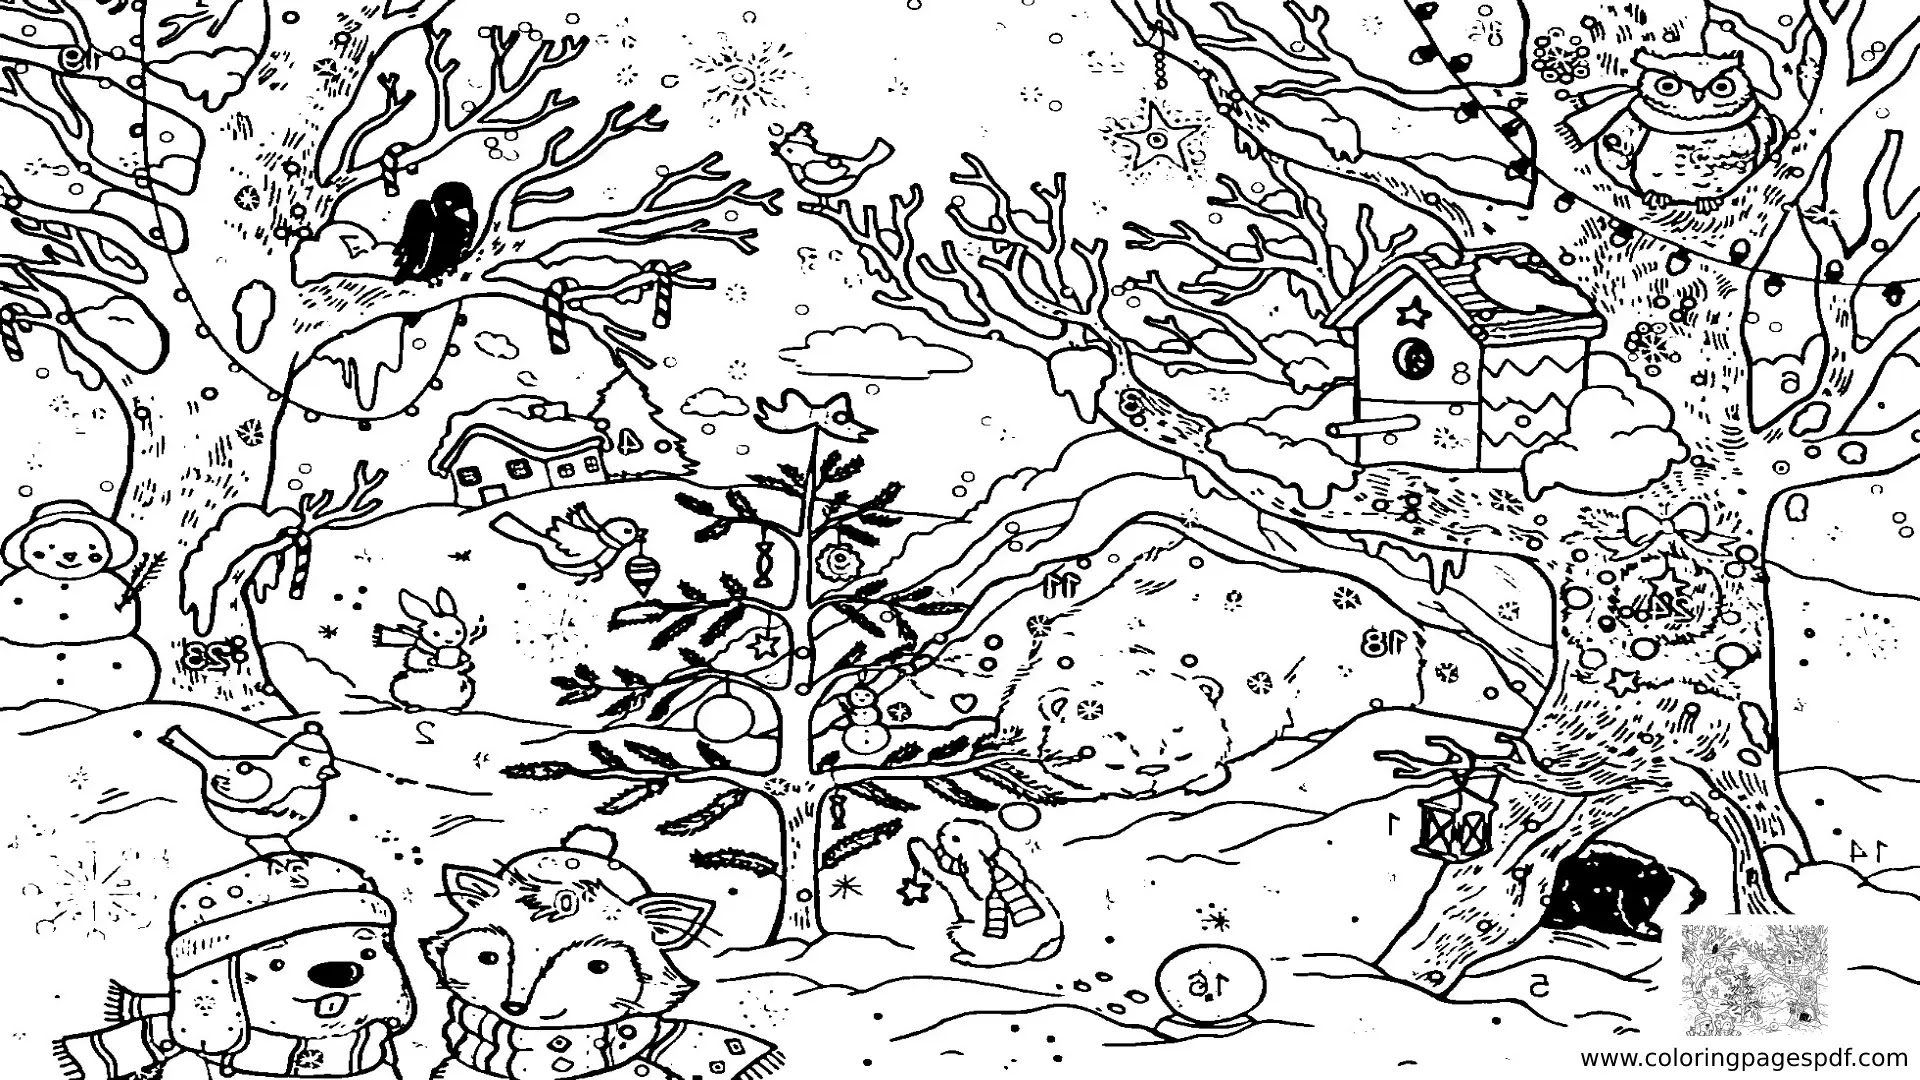 hope and winter coloring pages with no tail